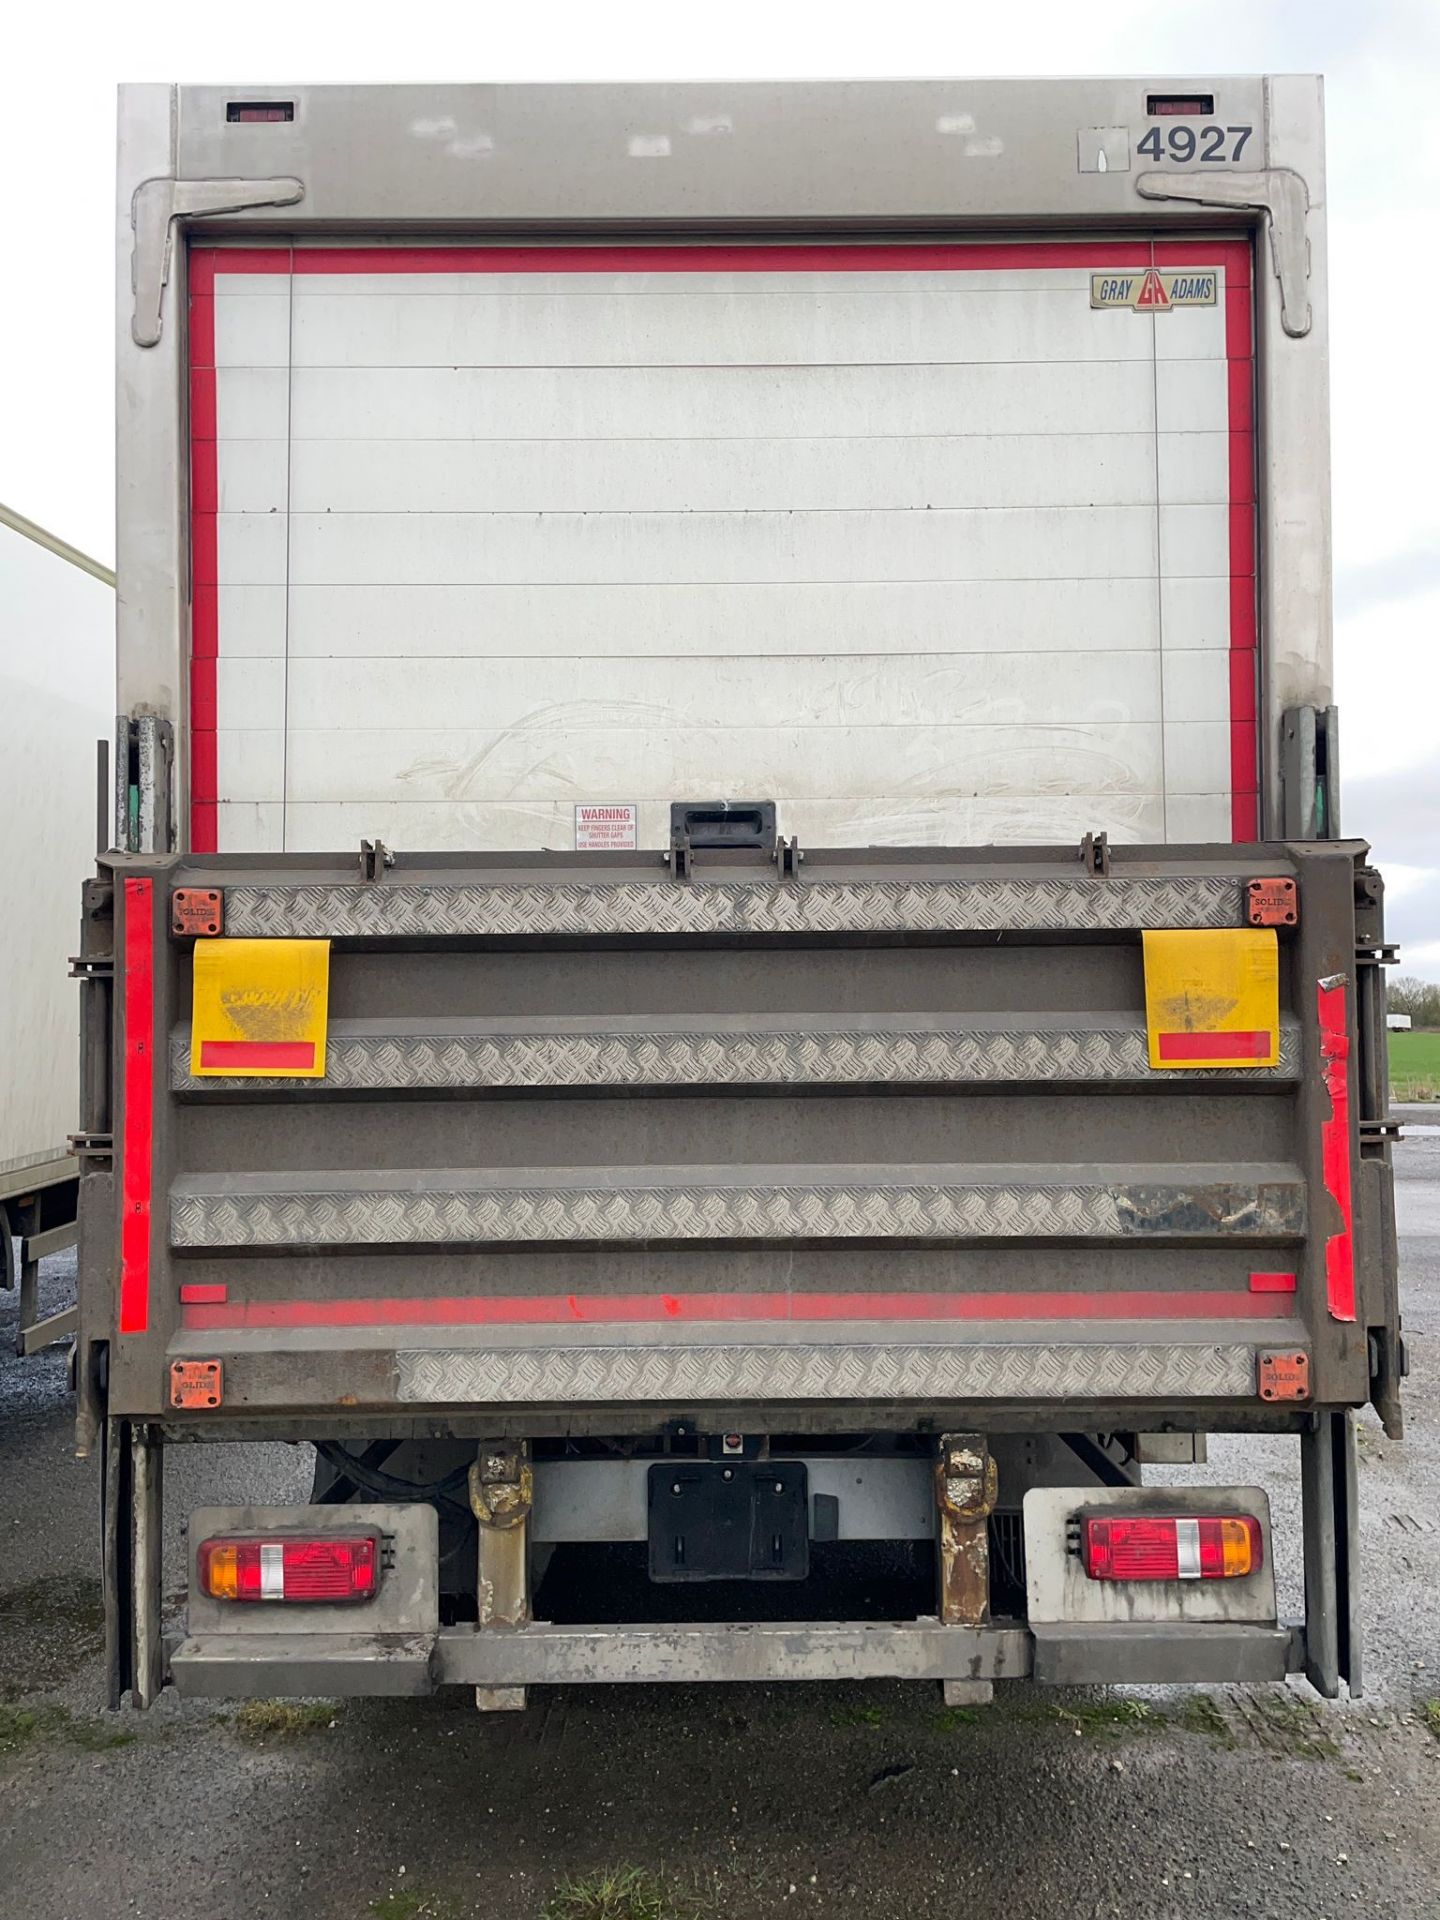 Trailer 4927 - 2013 G&A 10.4m Tandem Refrigerated Multi-Temp Trailer - Image 10 of 14